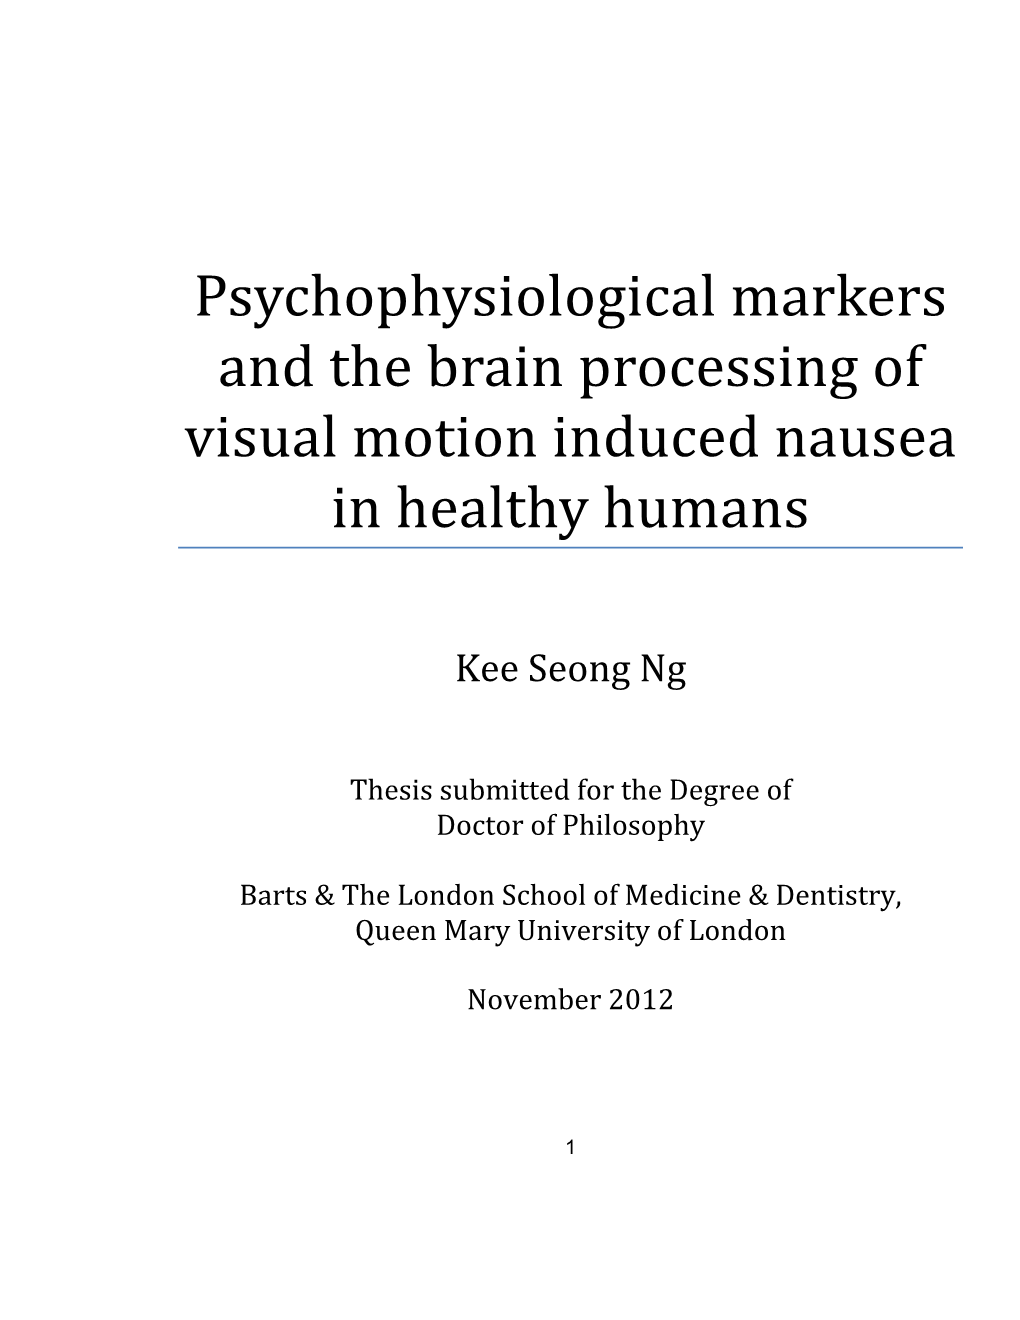 Psychophysiological Markers and the Brain Processing of Visual Motion Induced Nausea in Healthy Humans